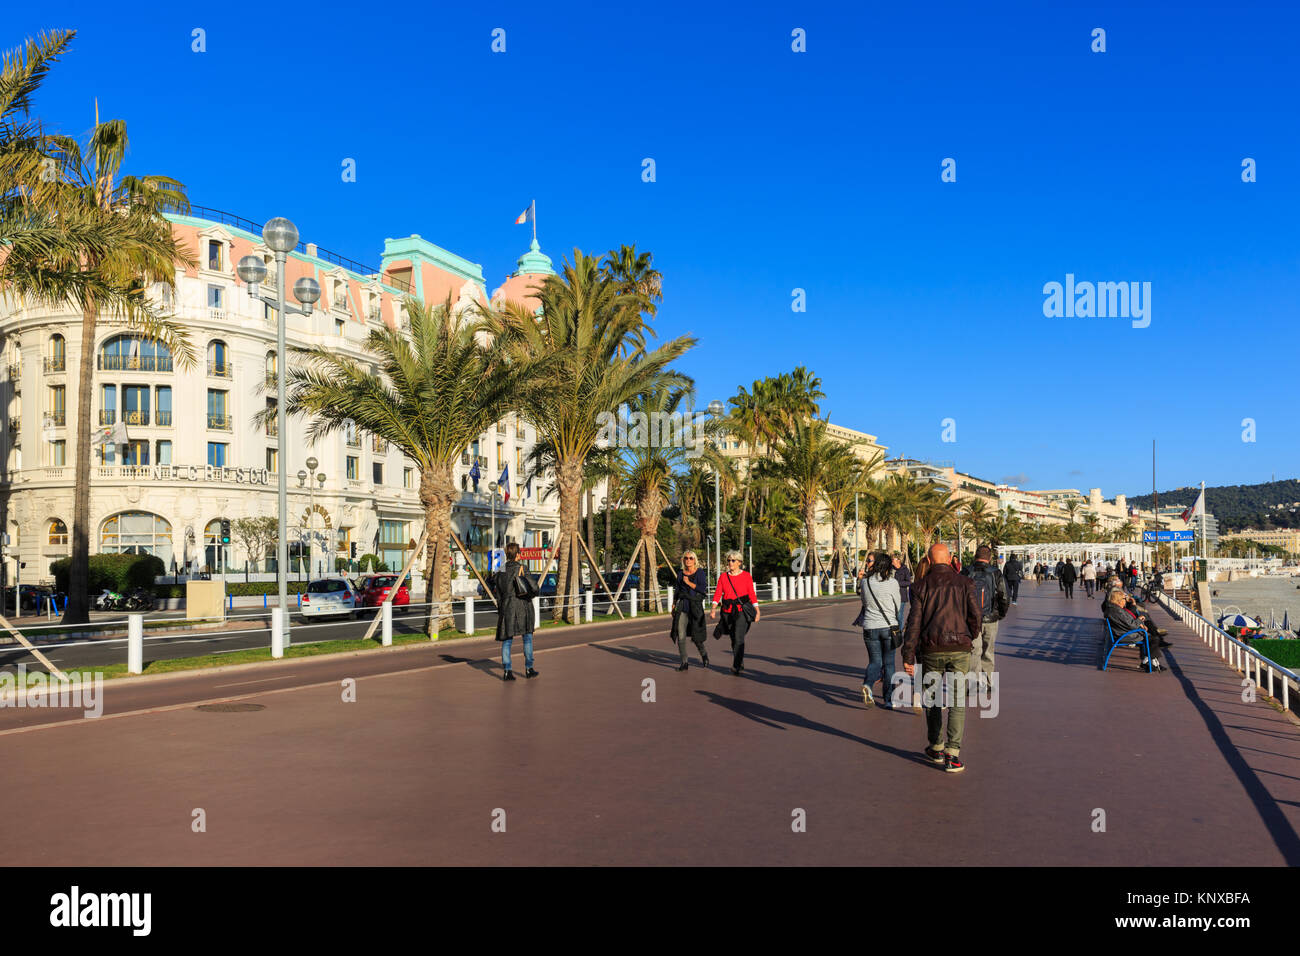 People walking in the sunshine on the seafront Promenade, Boulevard des Anglais, Nice, Cote d'Azur, France Stock Photo